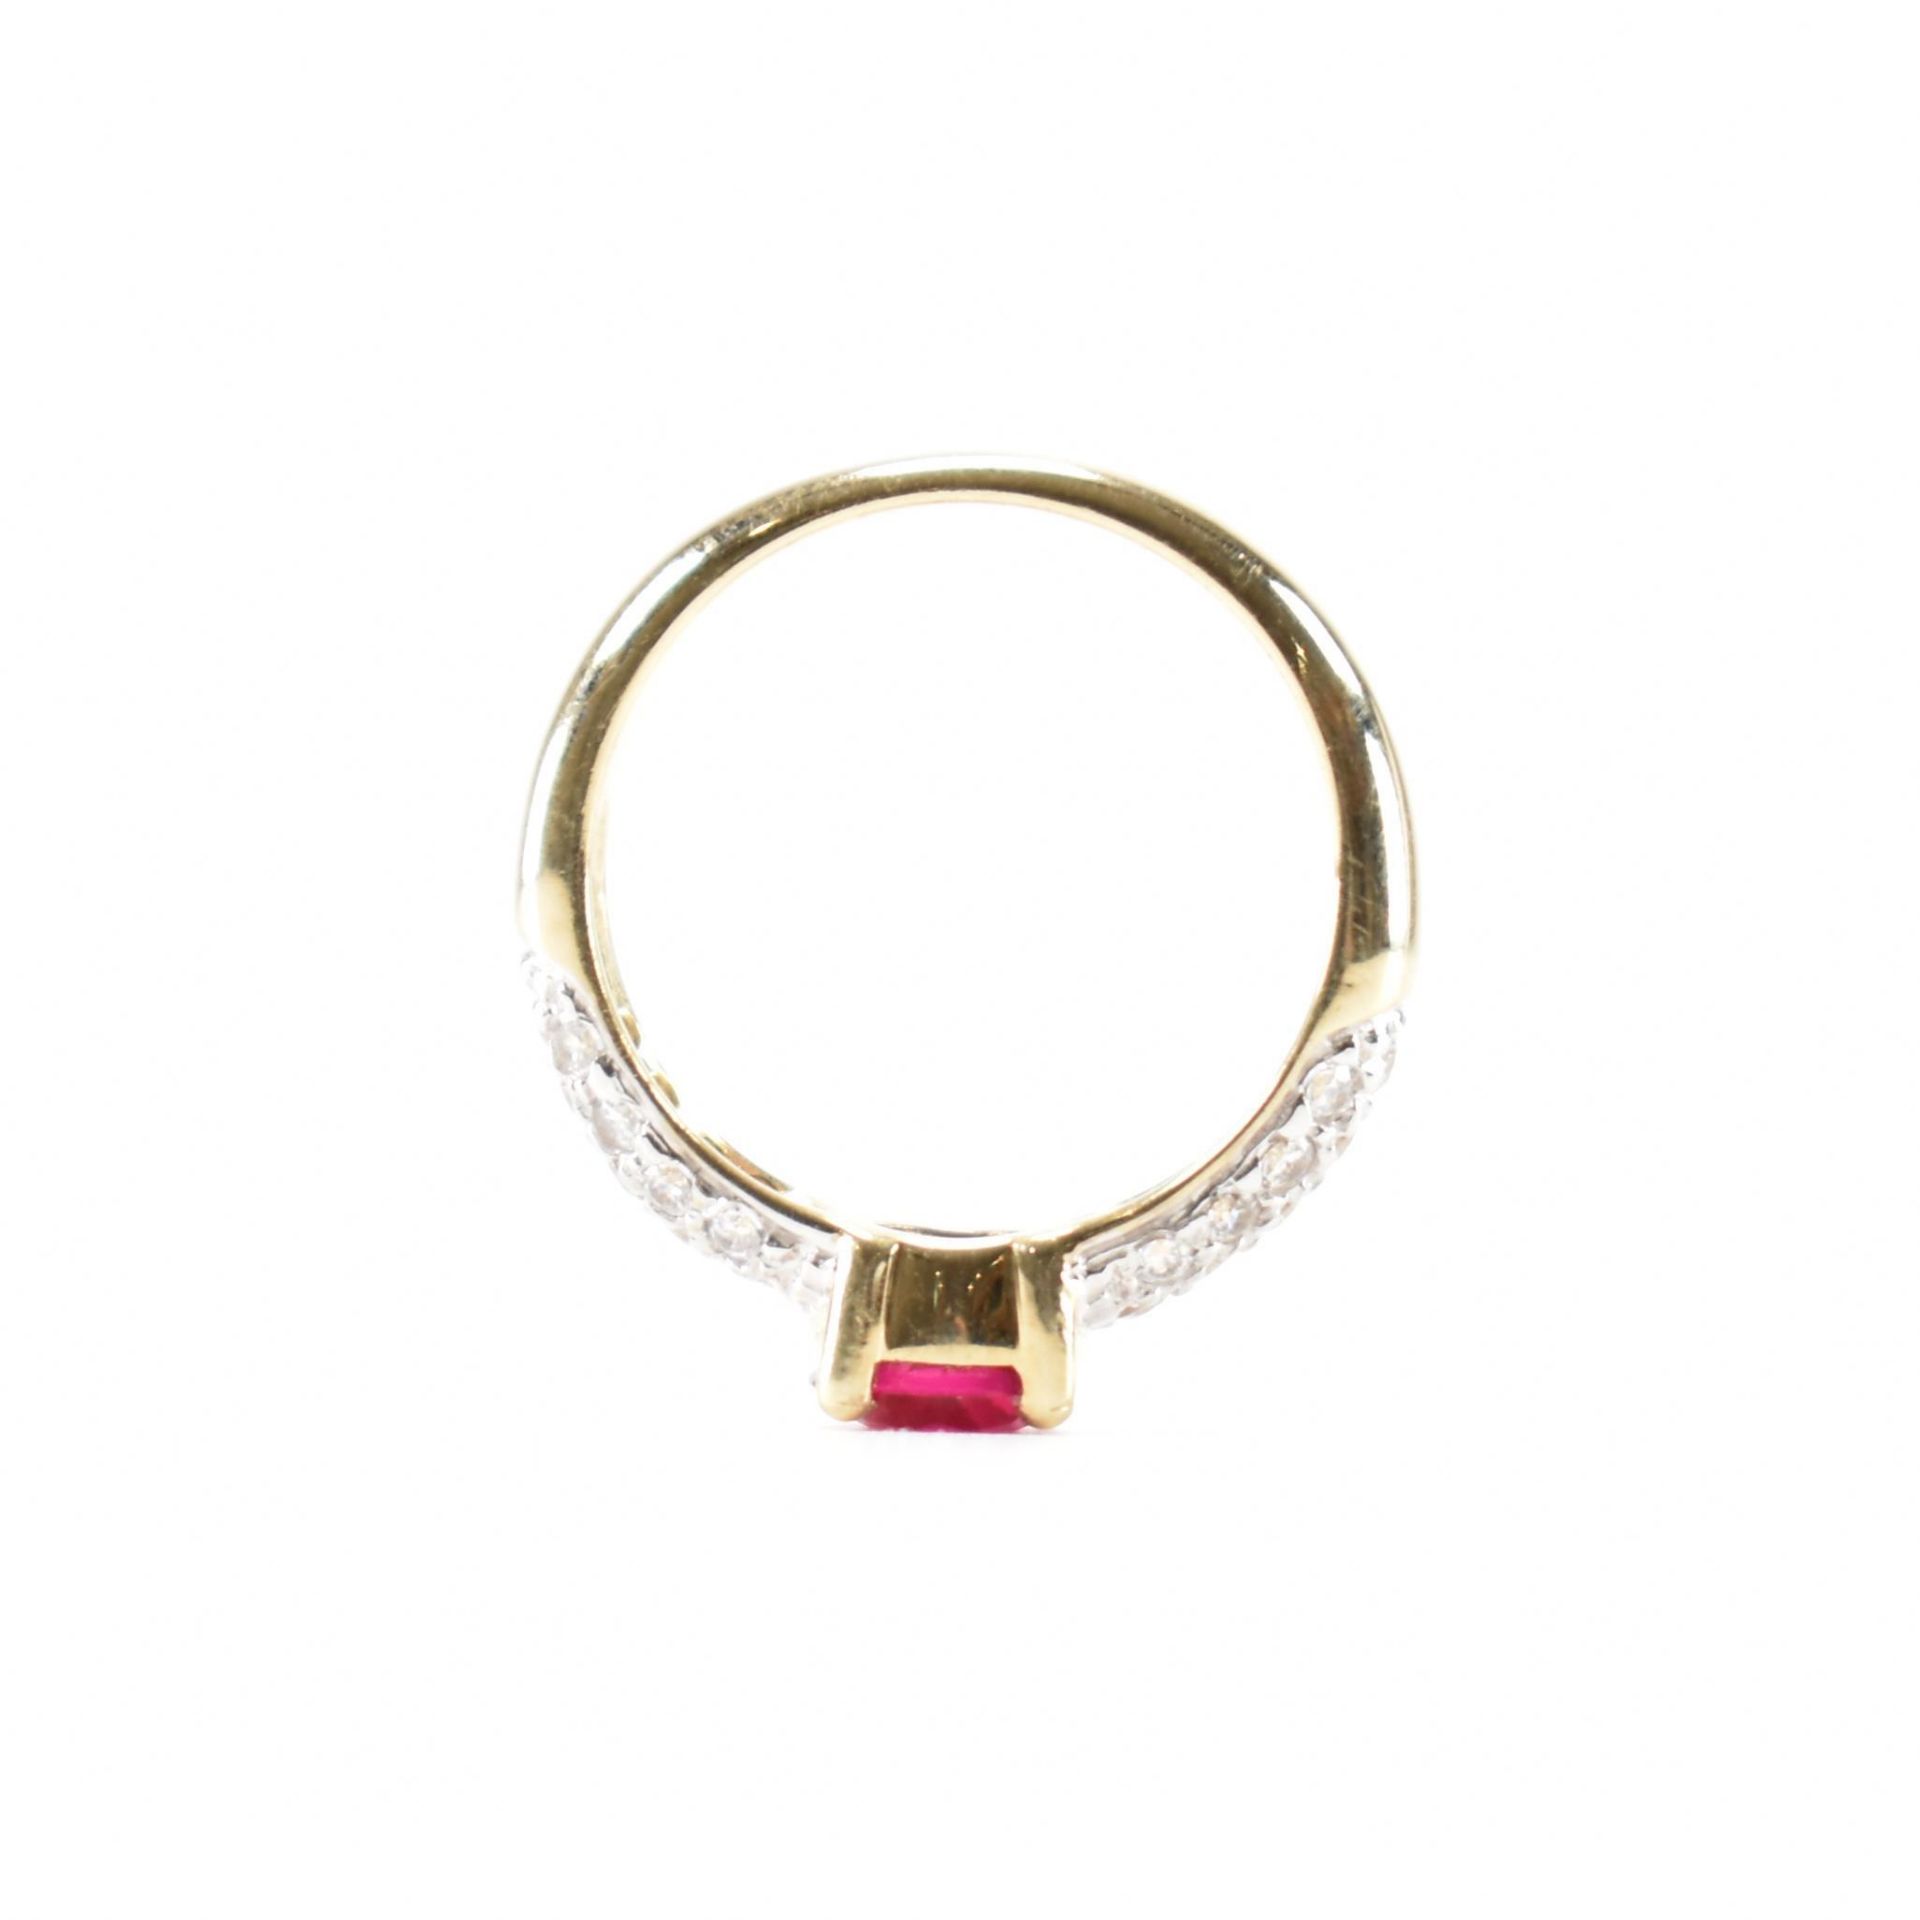 HALLMARKED 9CT GOLD SYNTHETIC RUBY & CZ RING - Image 5 of 7